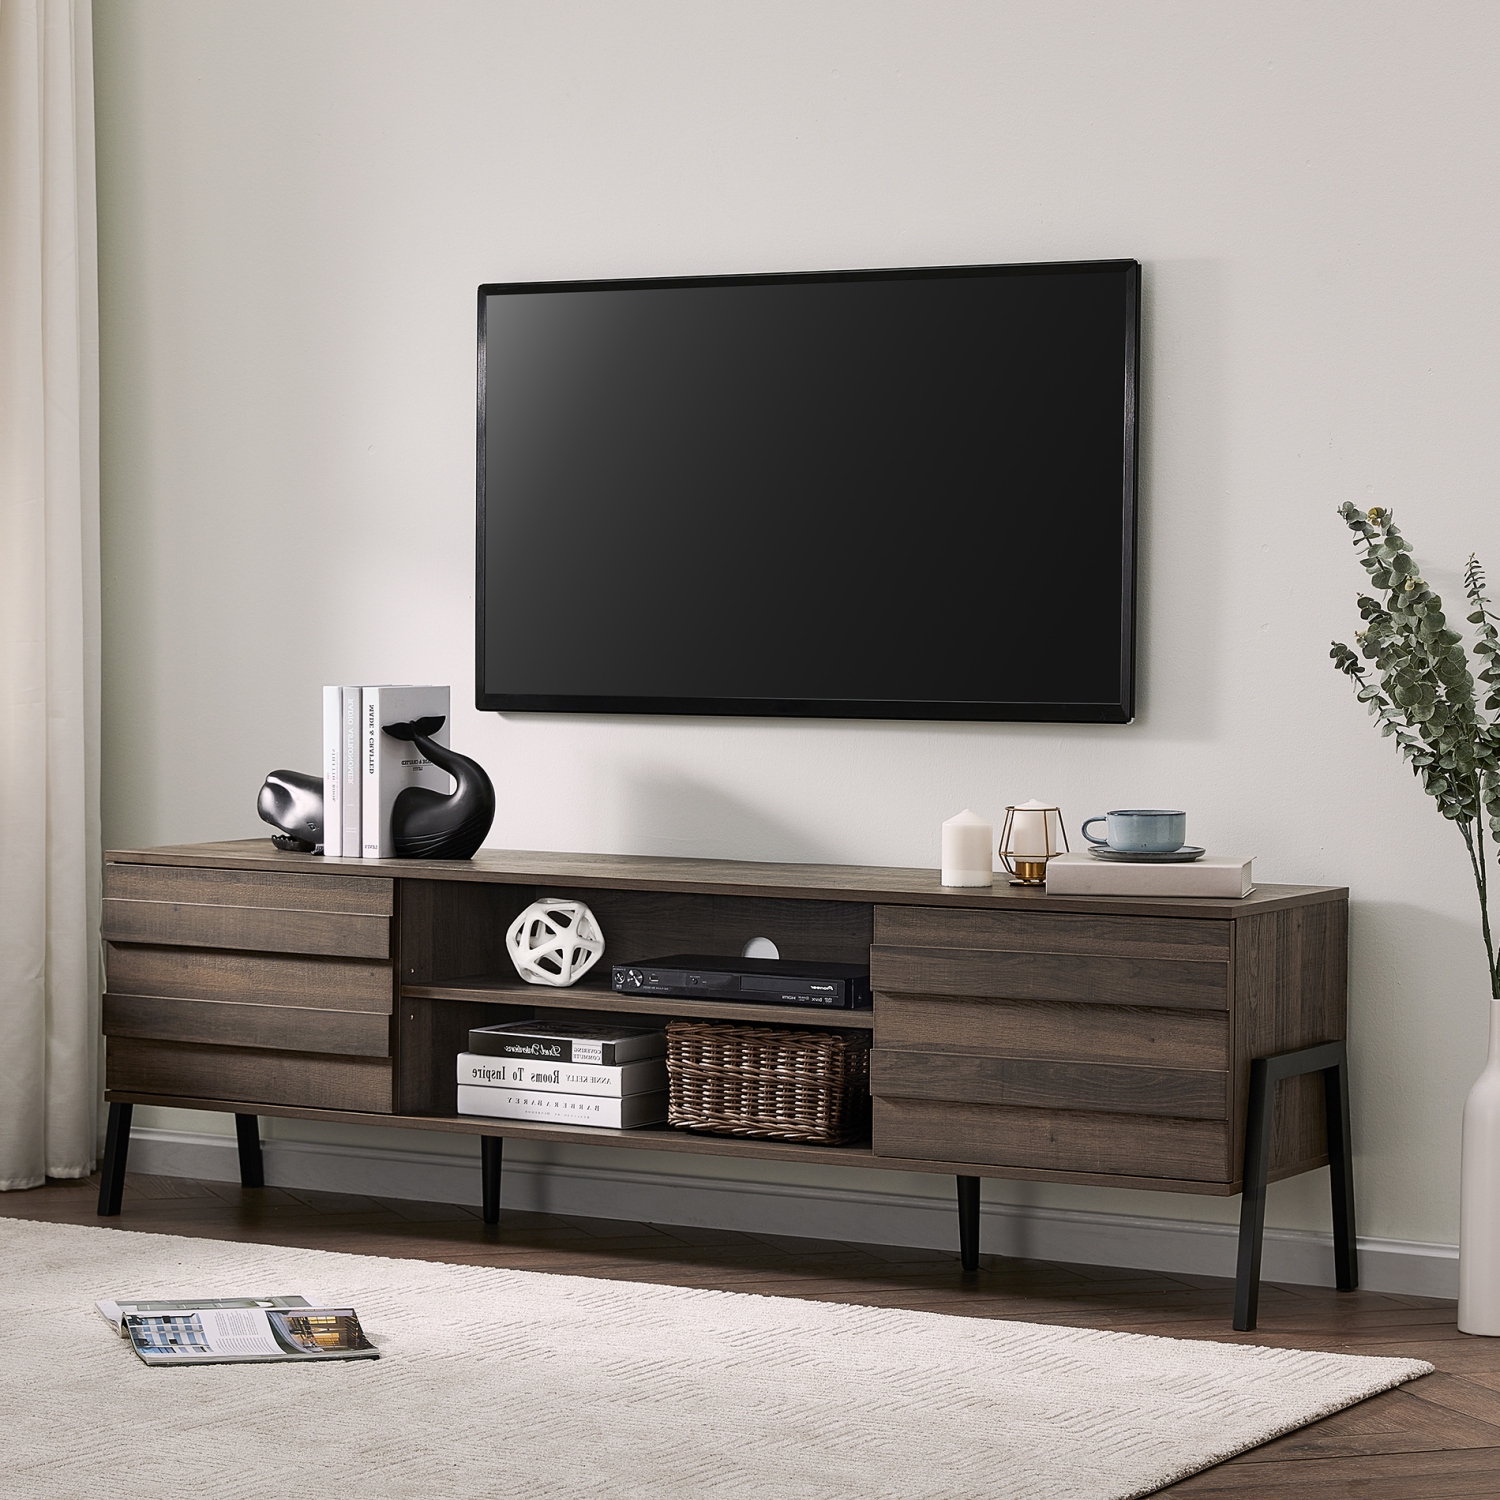 WAMPAT Mid-Century Modern TV Stand for TVs up to 75" Flat Screen Wood TV Console Media Cabinet with Storage, Home Entertainment Center in Brown for Living Room Bedroom, 70 inch